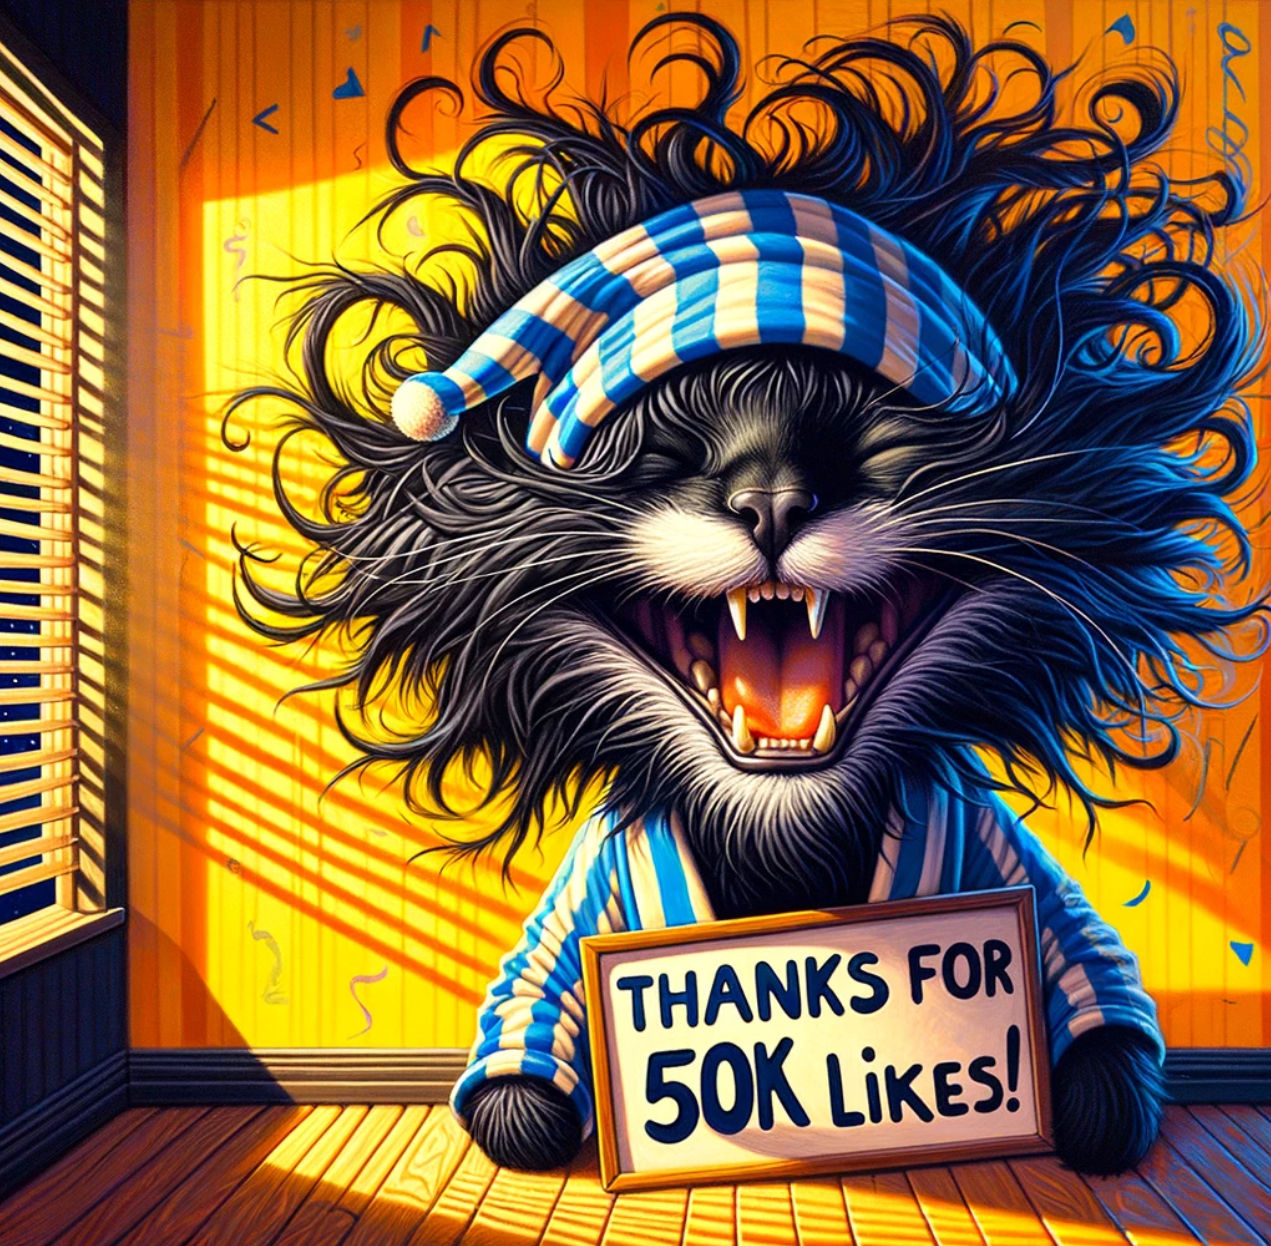 Thank you for 50K Likes!